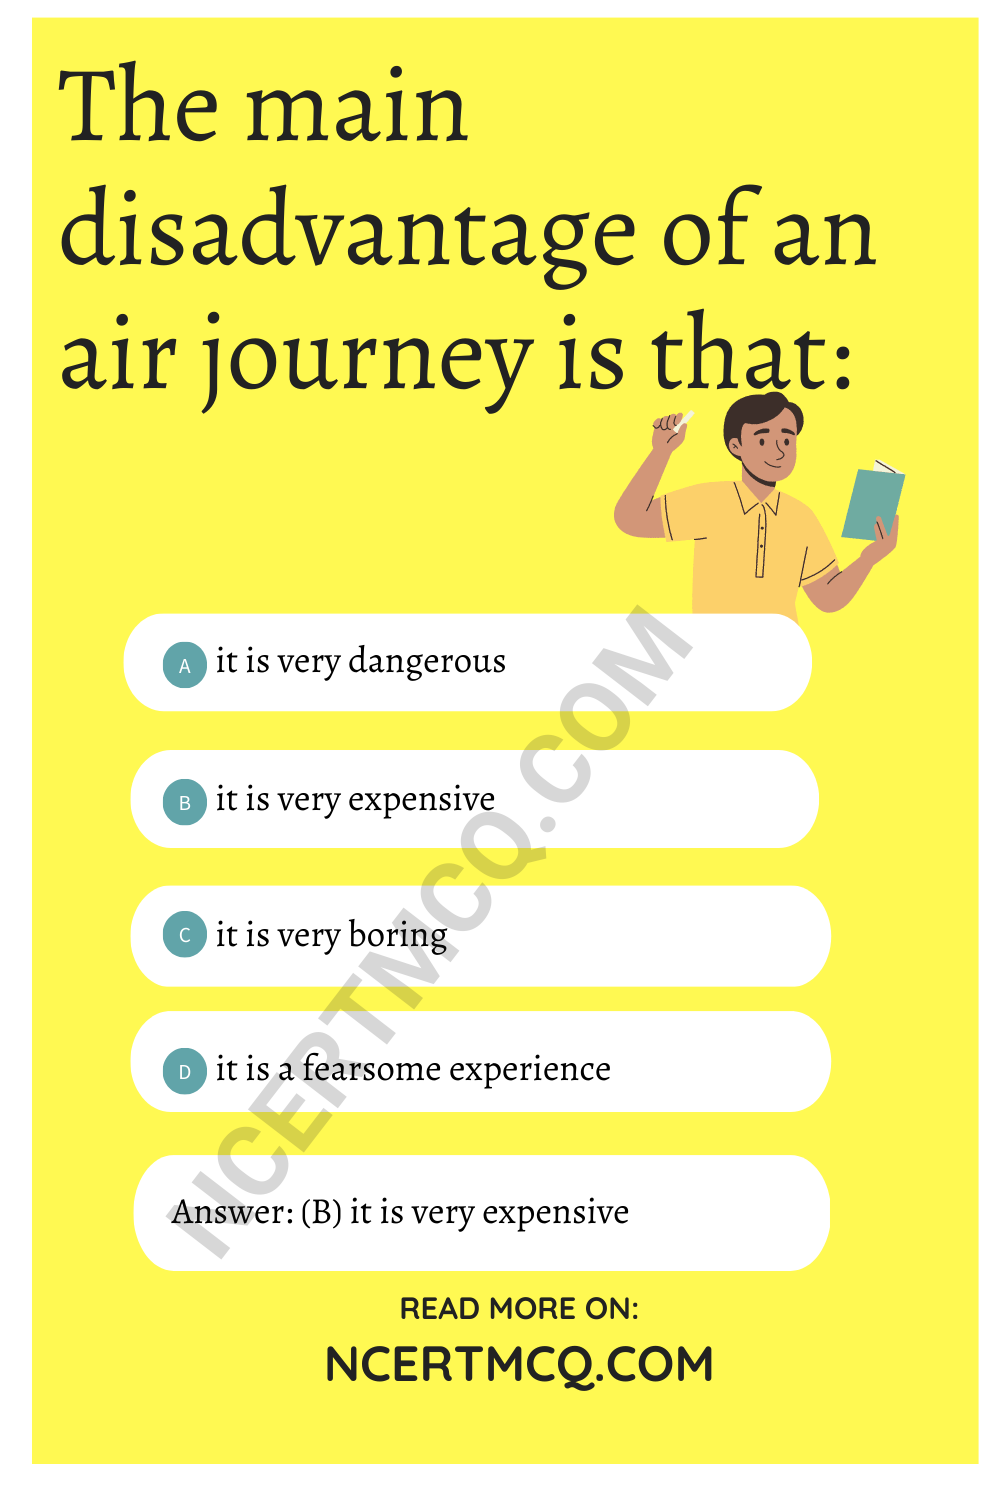 The main disadvantage of an air journey is that: